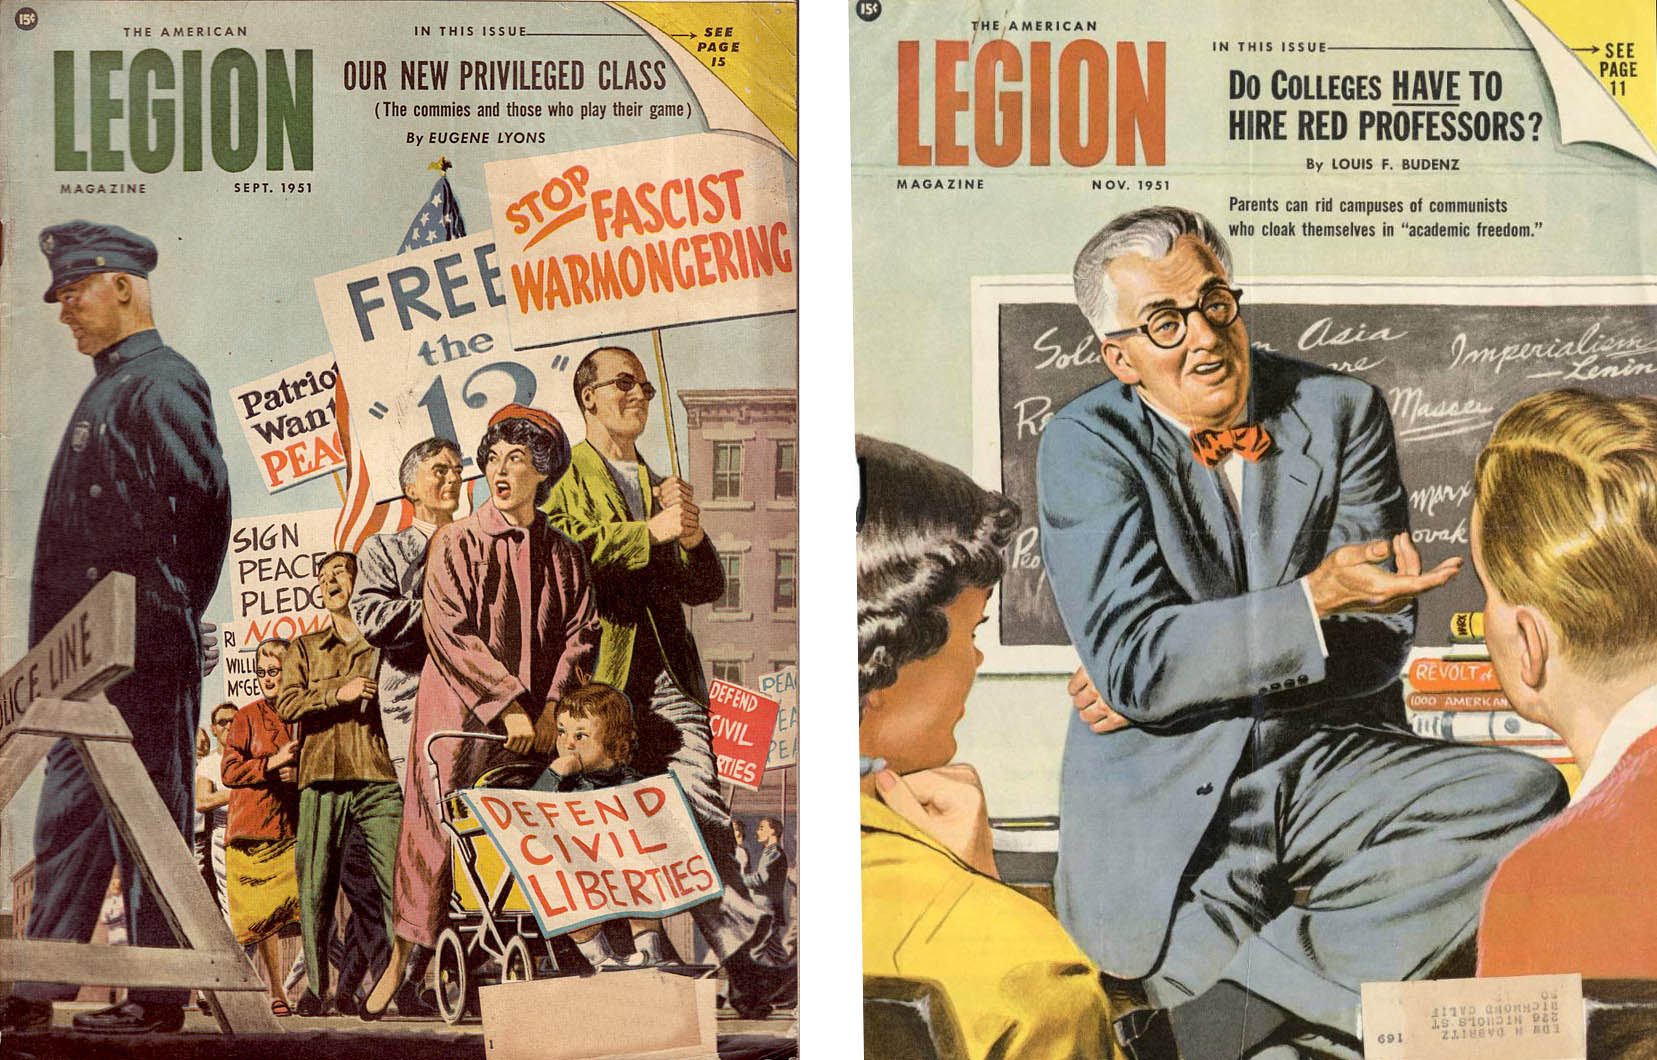 Two 1951 covers from the American Legion magazine depicting Communism and activism on campus. (Courtesy/Oregon State Libraries special collection)